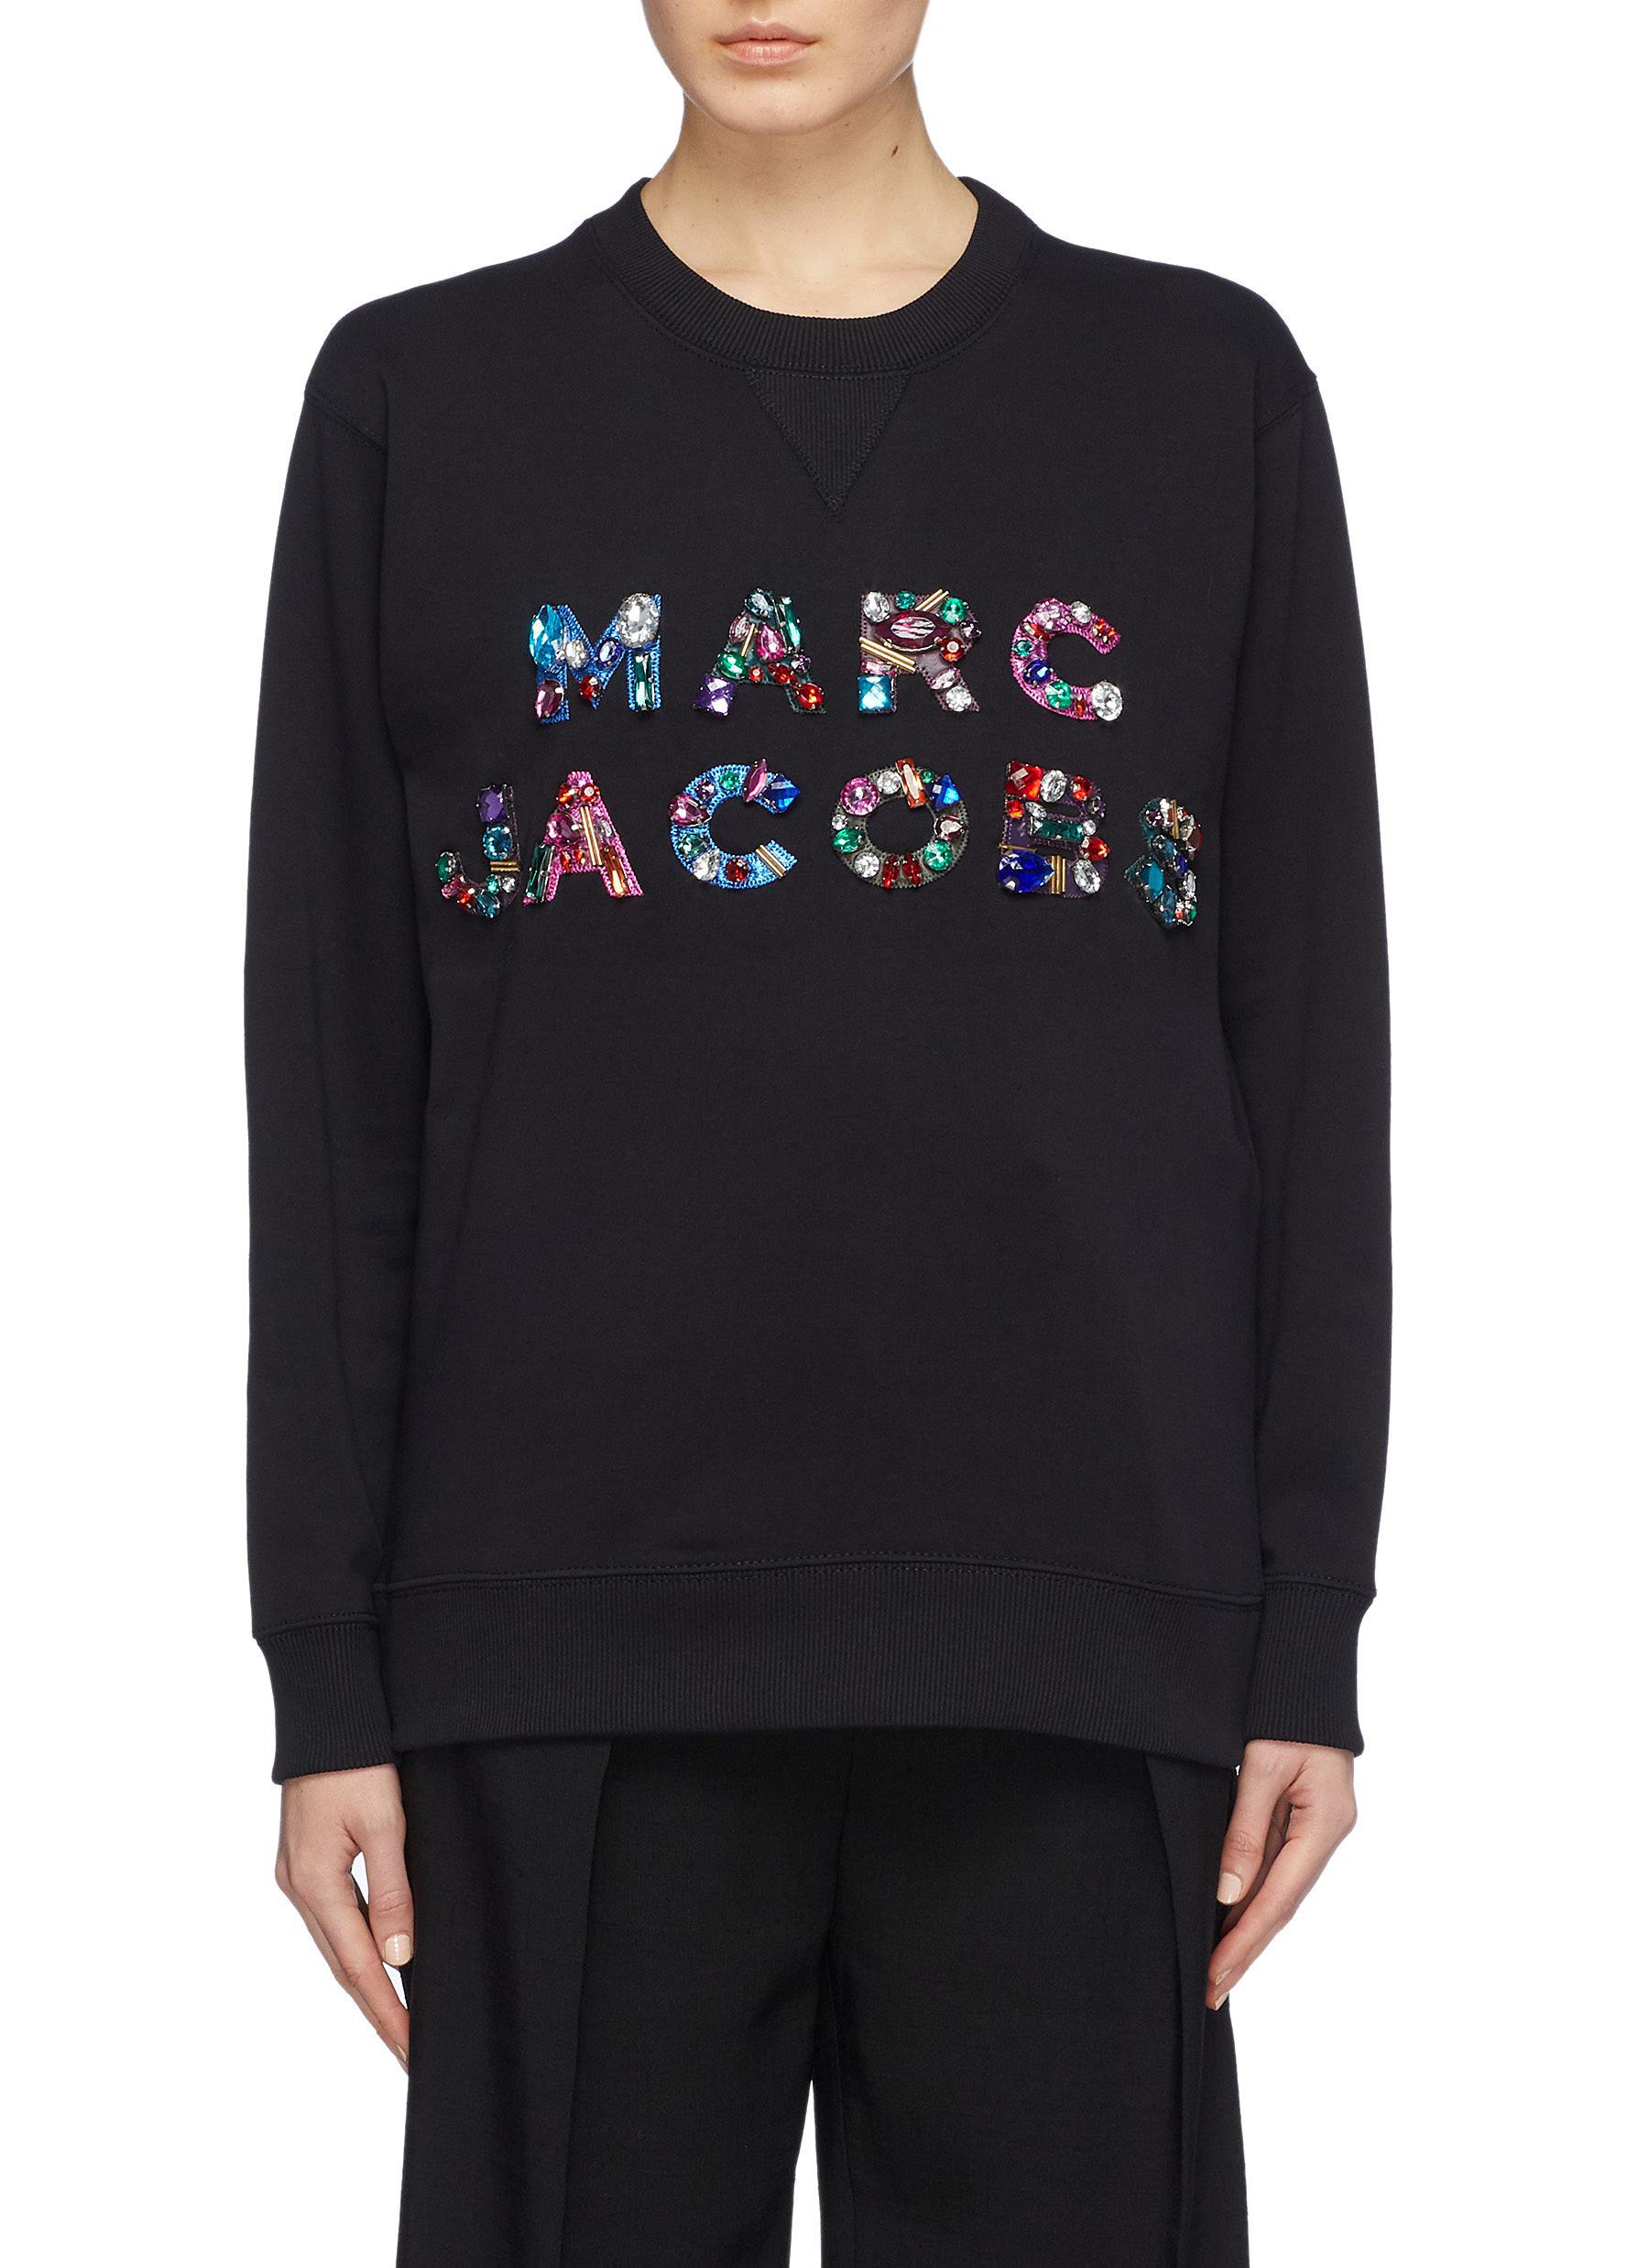 Marc Jacobs Embroidered And Embellished Cotton Sweatshirt in Black - Lyst